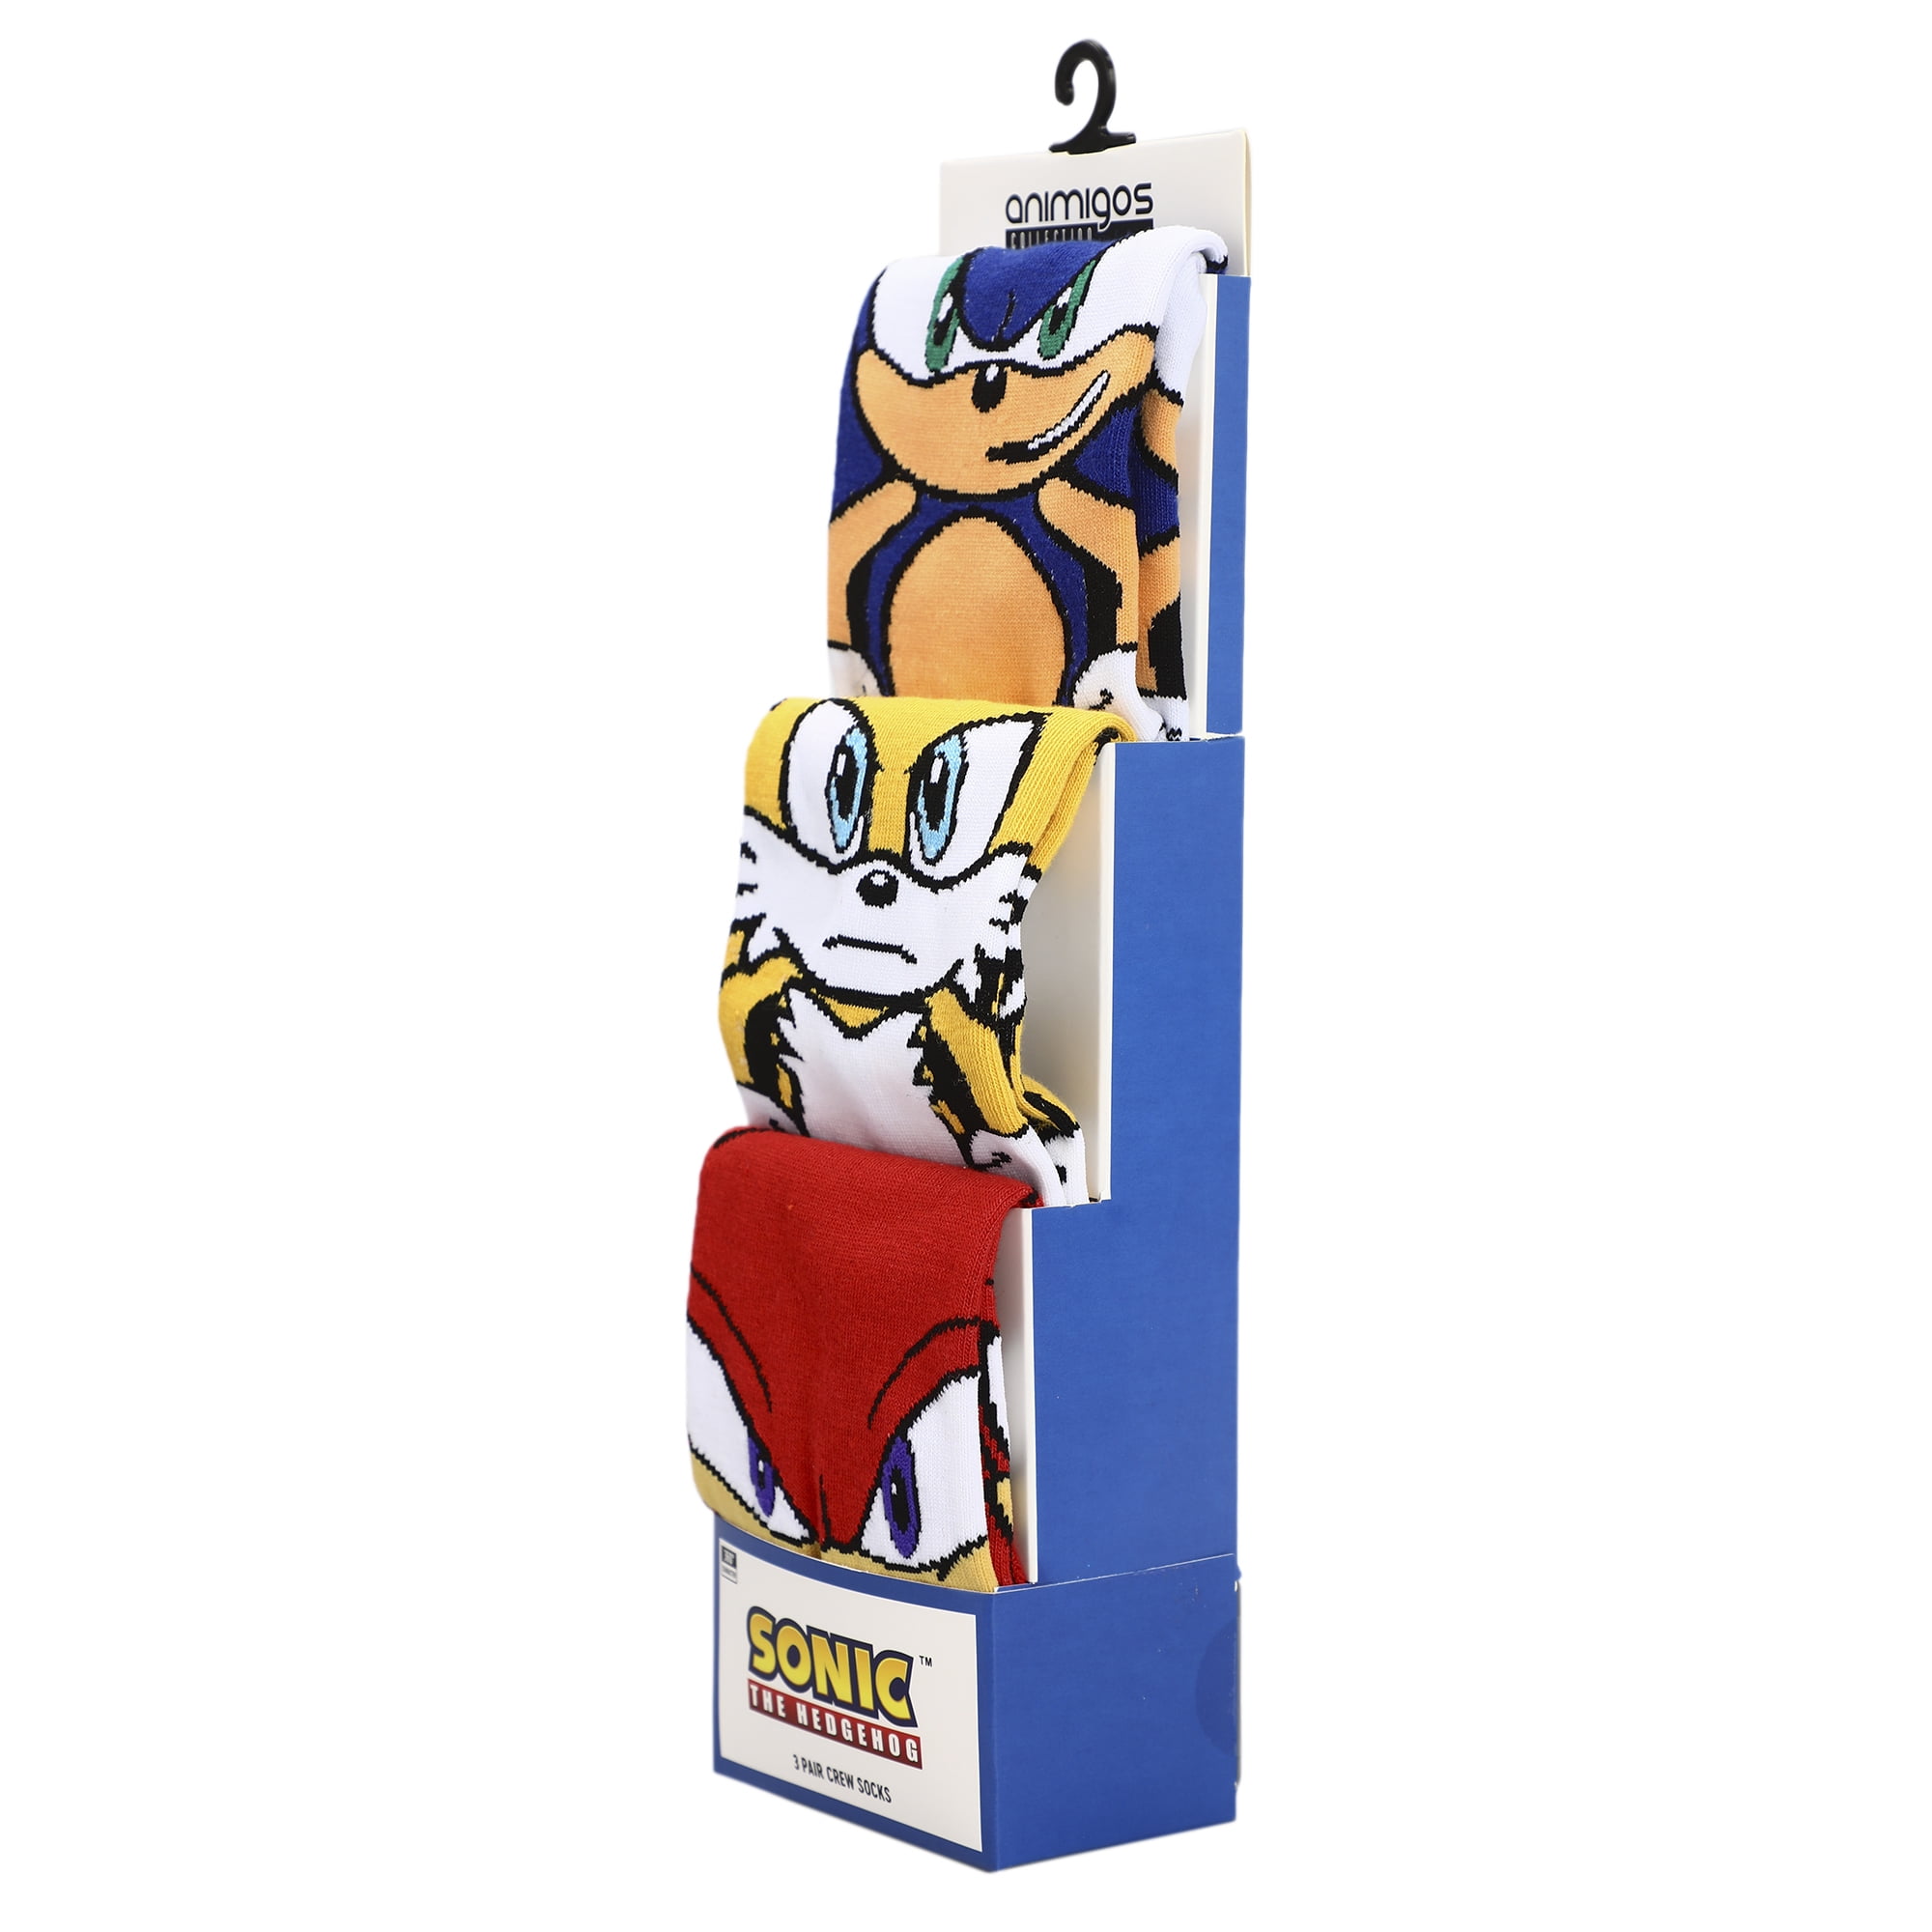 Sonic the Hedgehog 360 casual Character Crew Socks for Men 